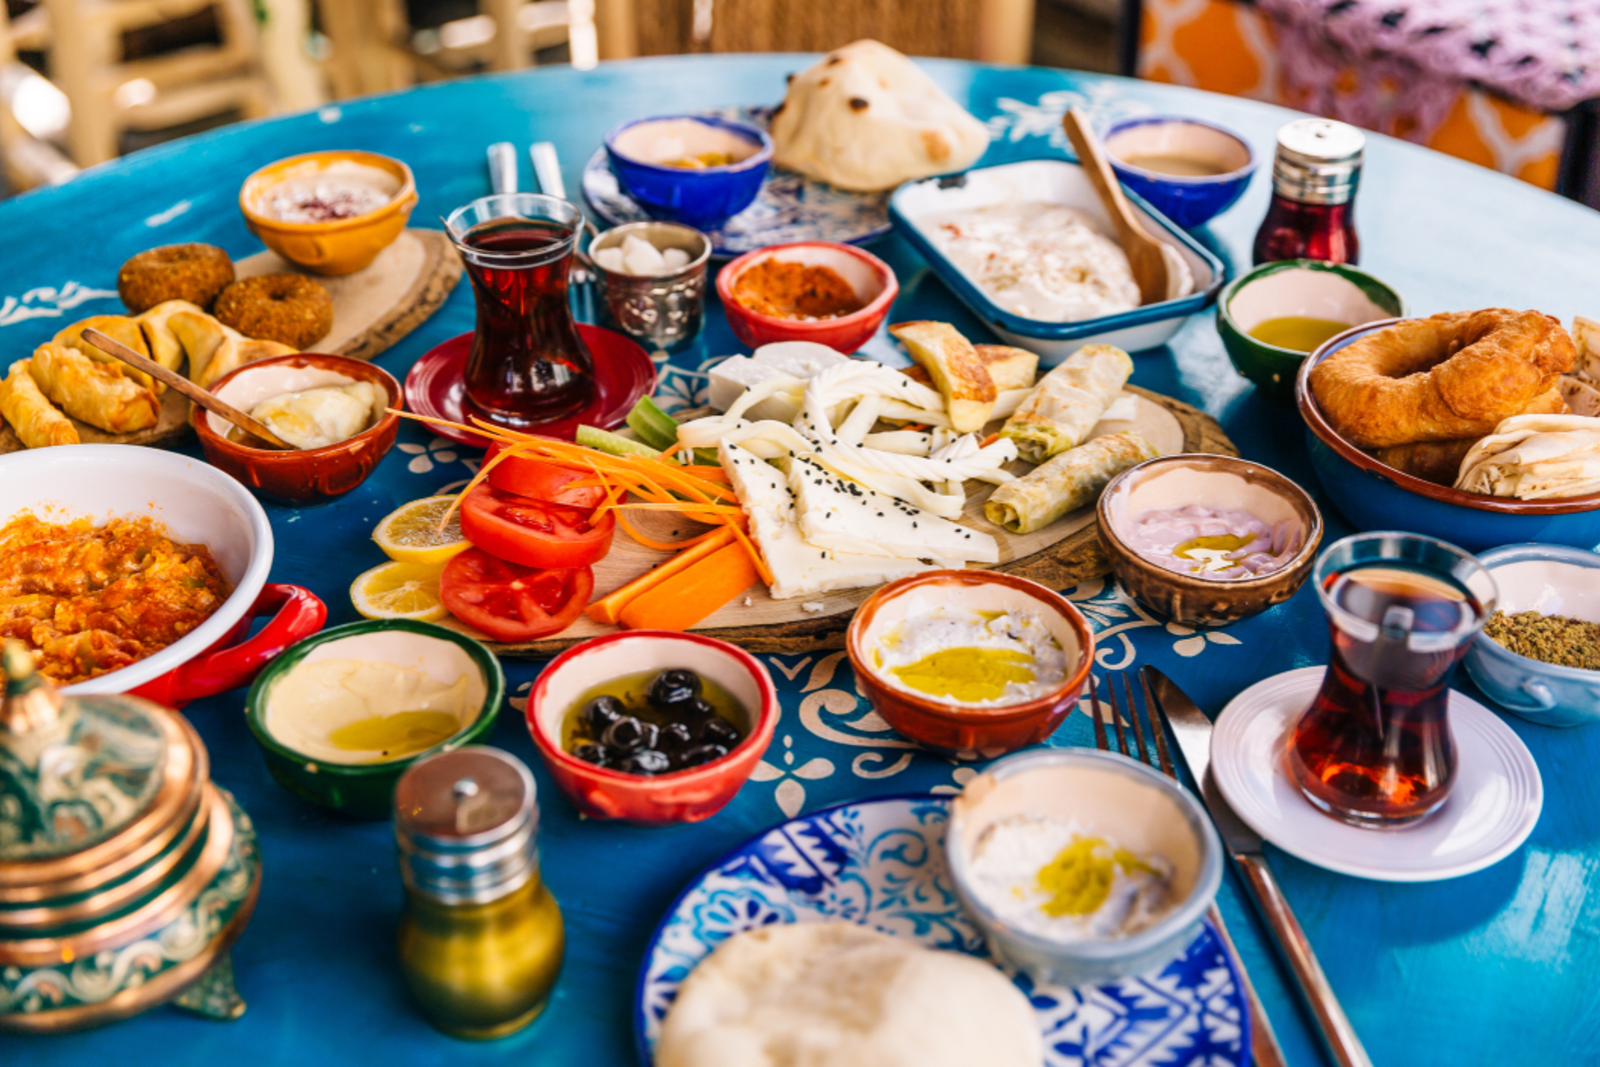 Excited to try a Turkish breakfast? Make sure to bring your appetite!